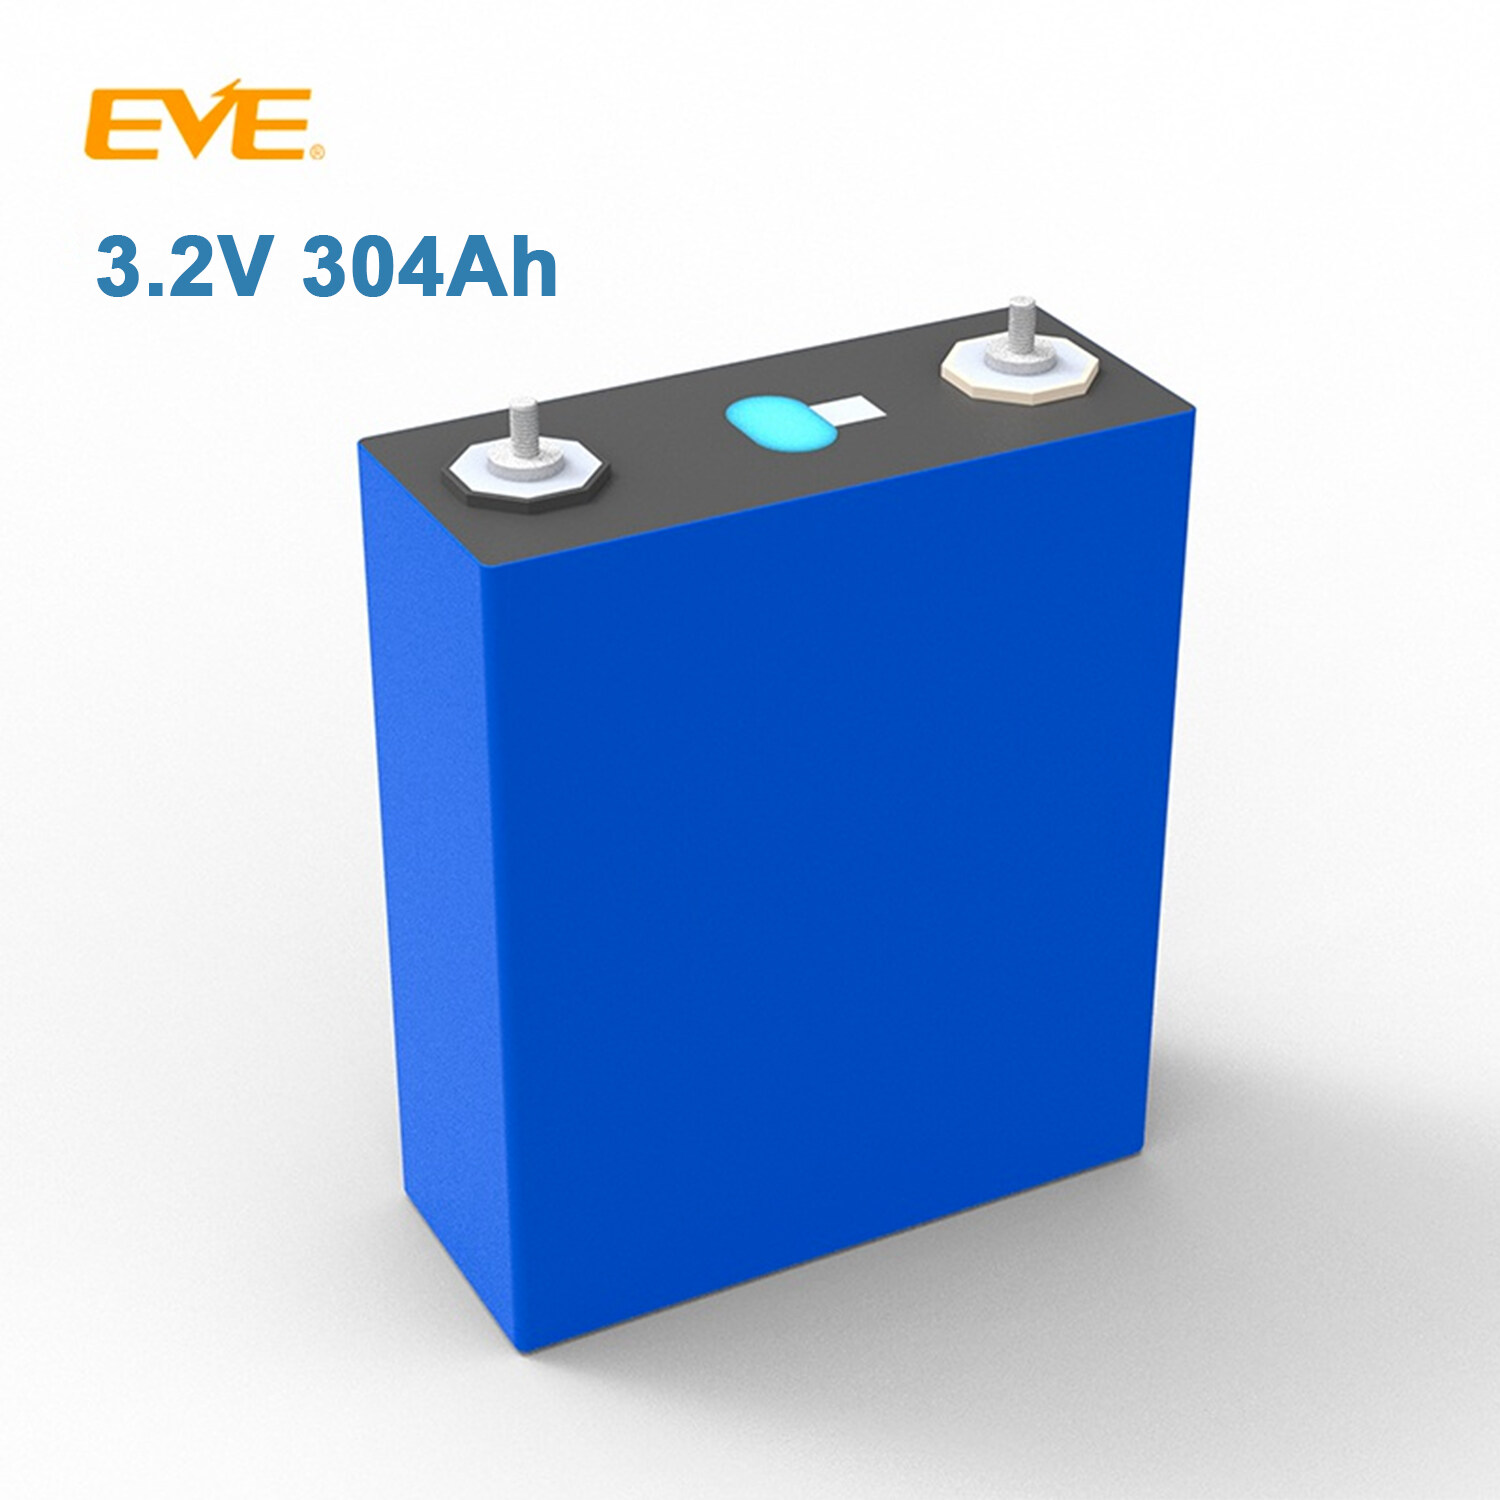 EVE 3.2V 304Ah Rechargeable LiFePO4 Battery Cells 100% Capacity